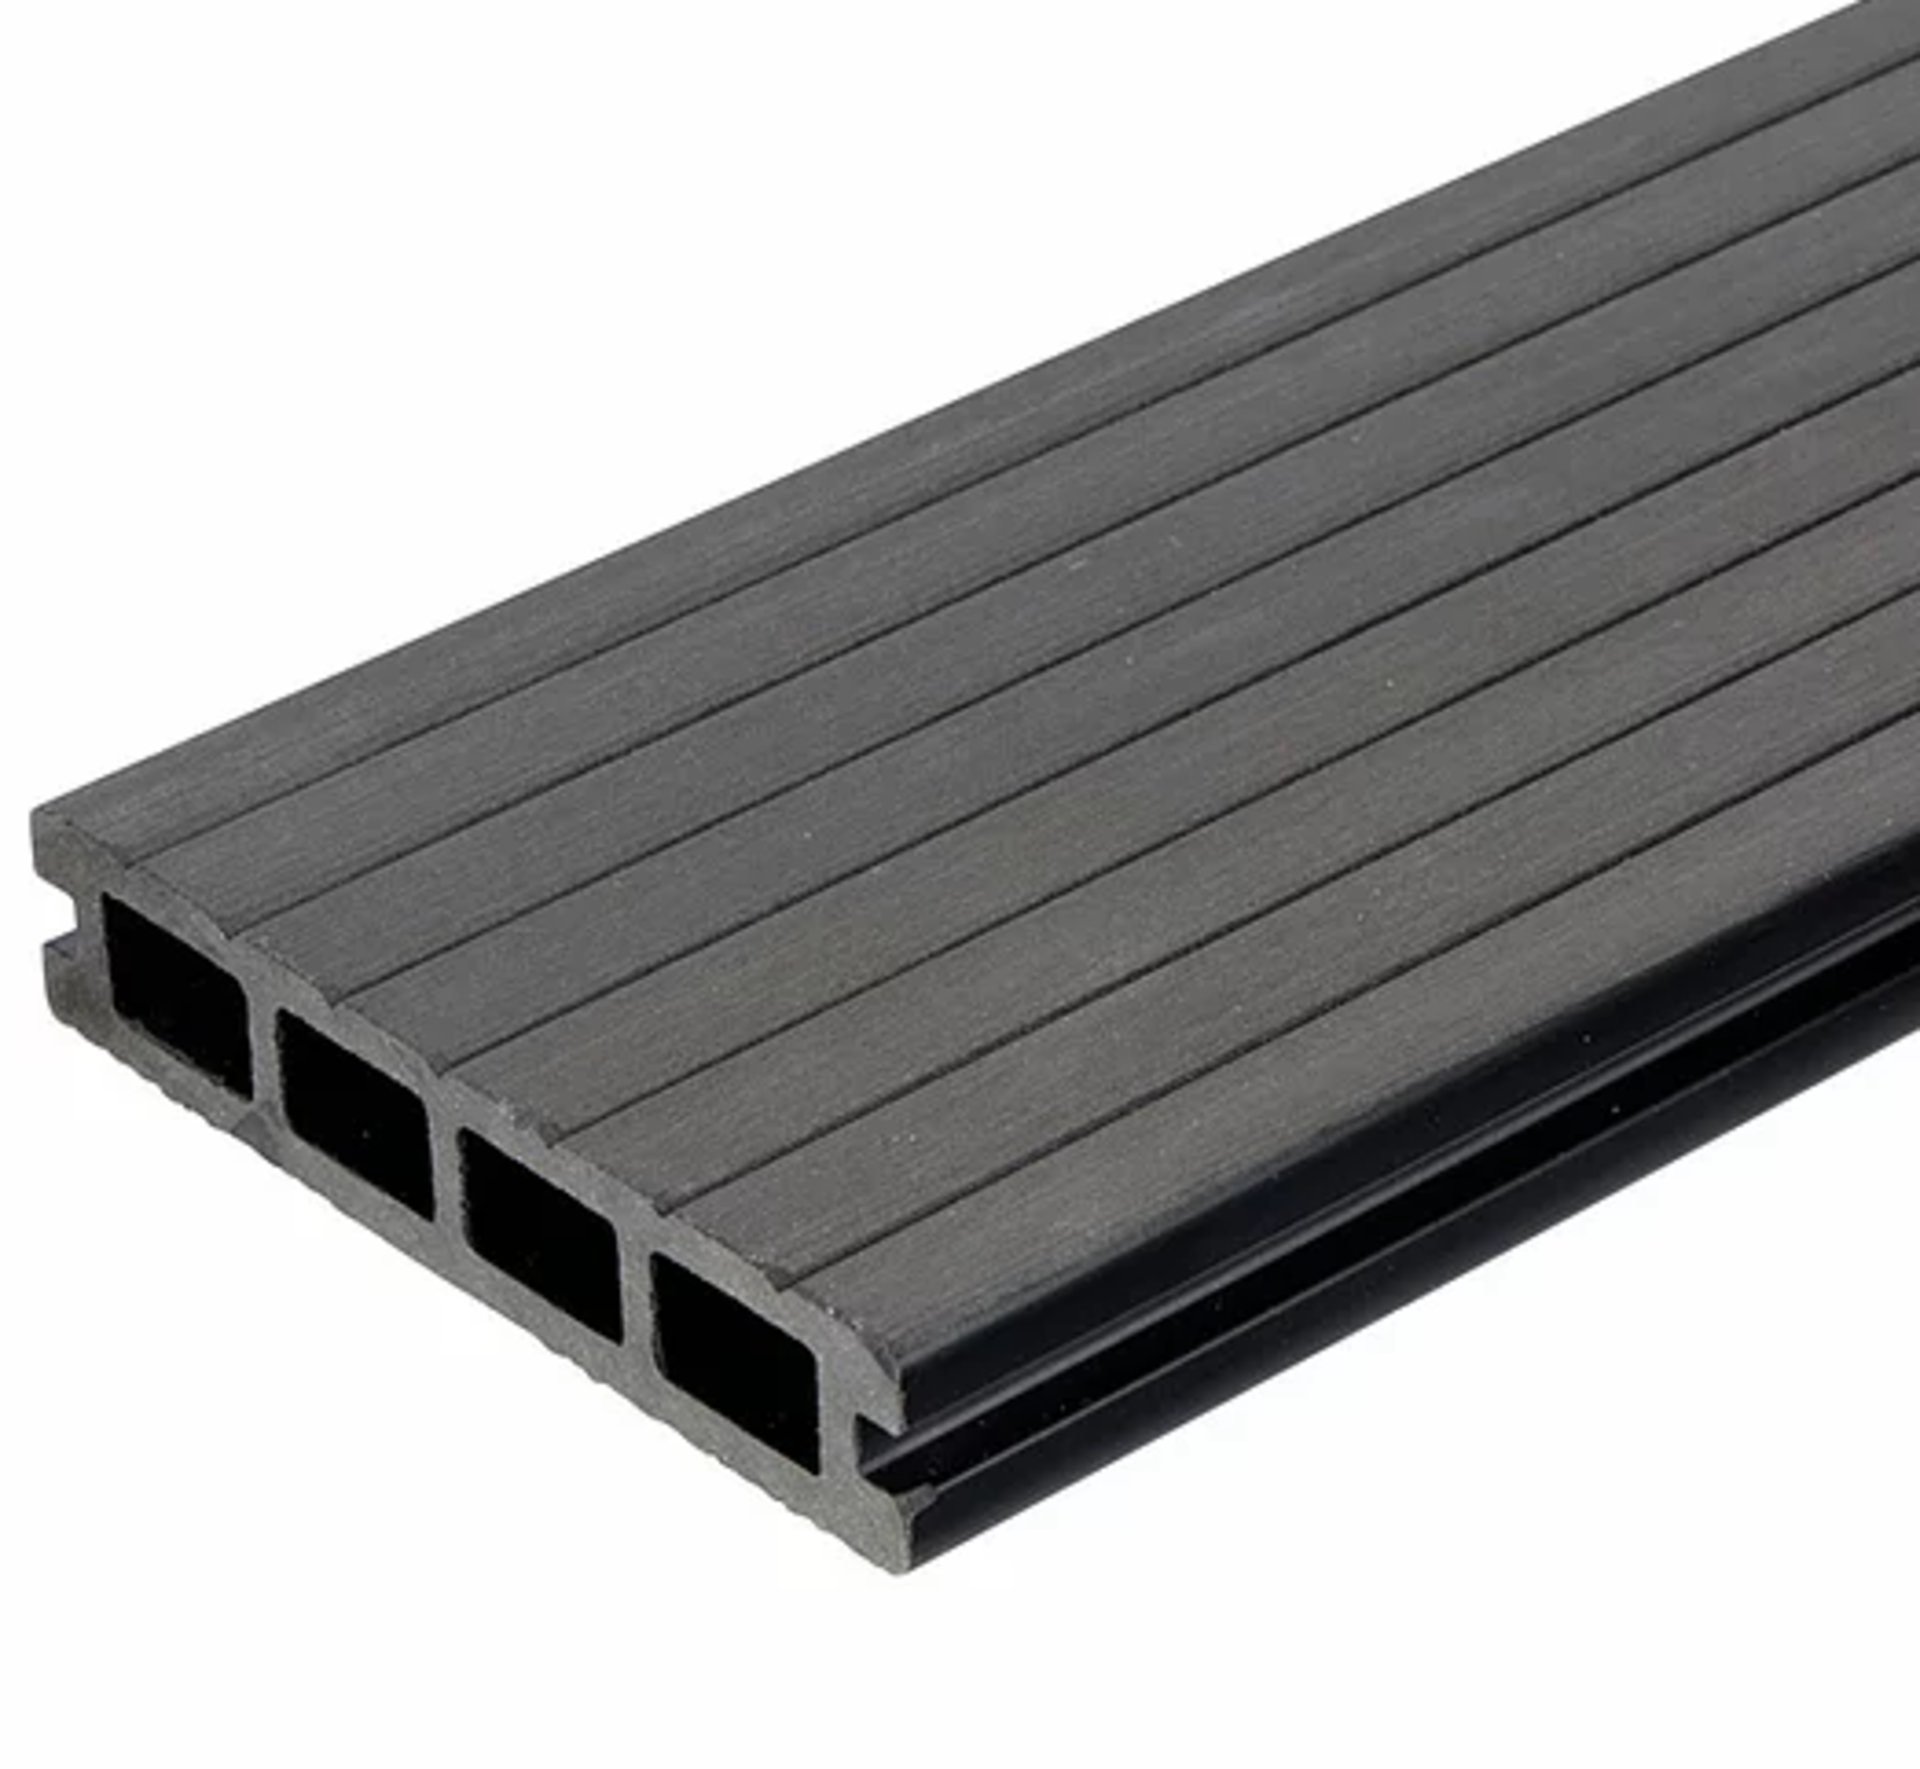 * 20 WPC Composite Dark Grey Double sided Embossed Woodgrain Decking Boards 2900mm x 146mm x 25mm - Image 3 of 5